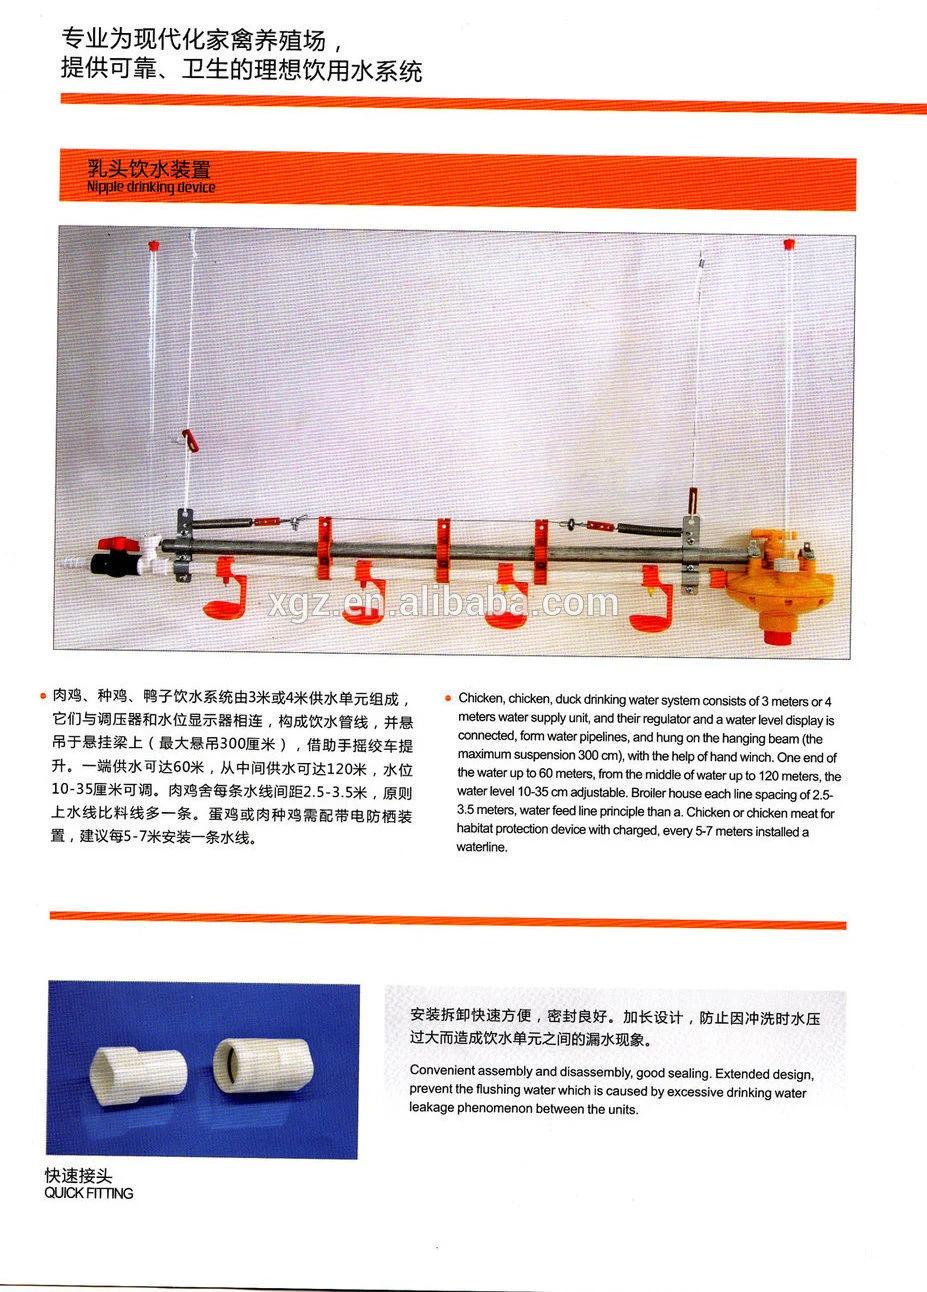 High Quality Easily Feeding Technical Low Cost Chicken System